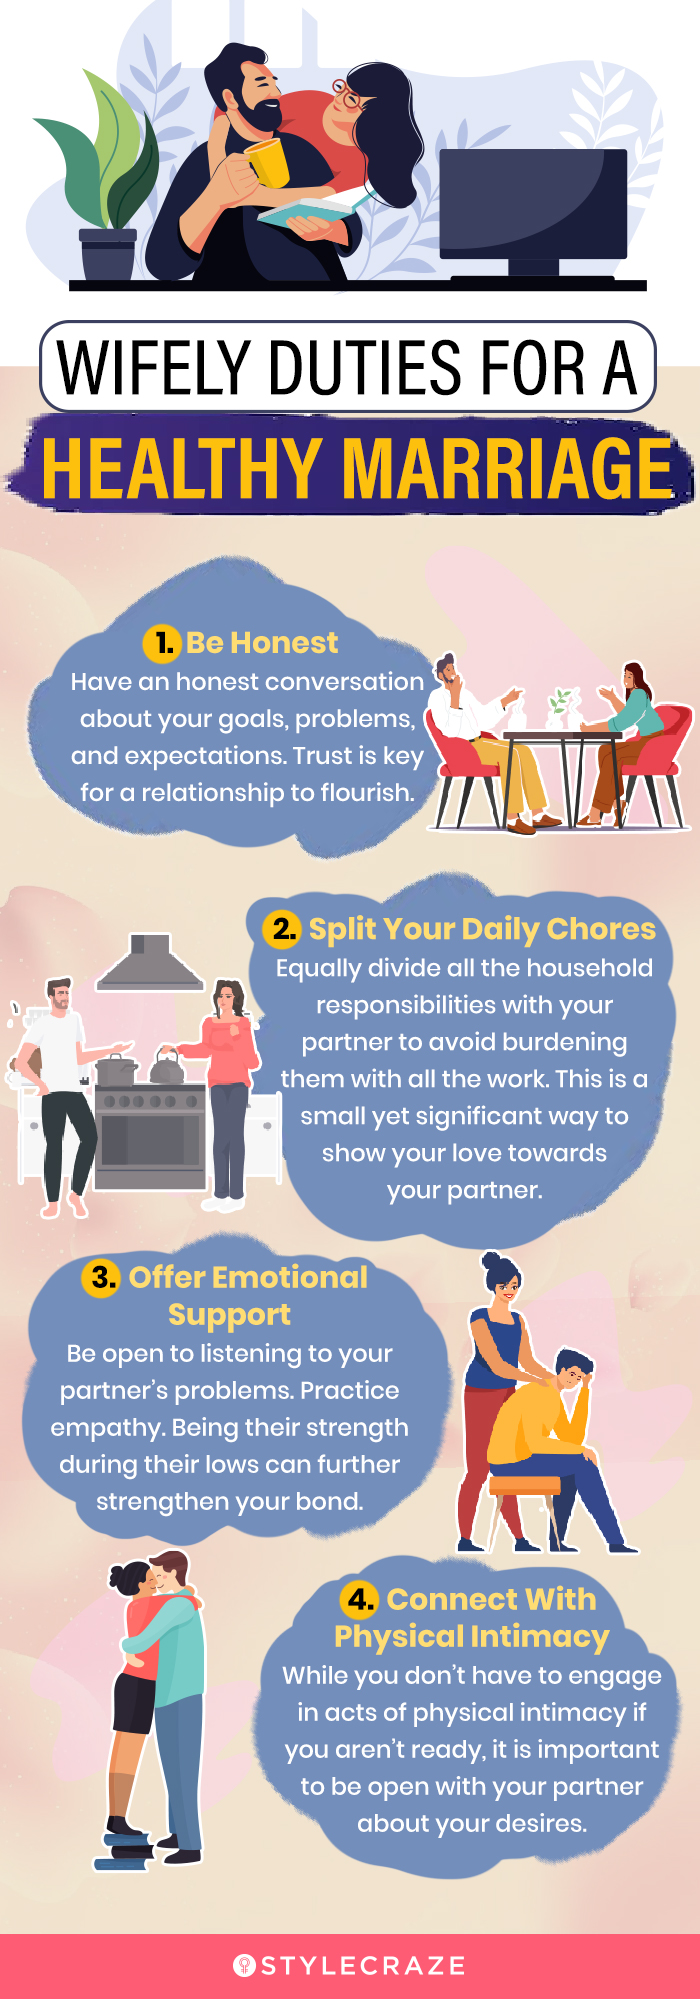 wifely duties for a healthy marriage (infographic)